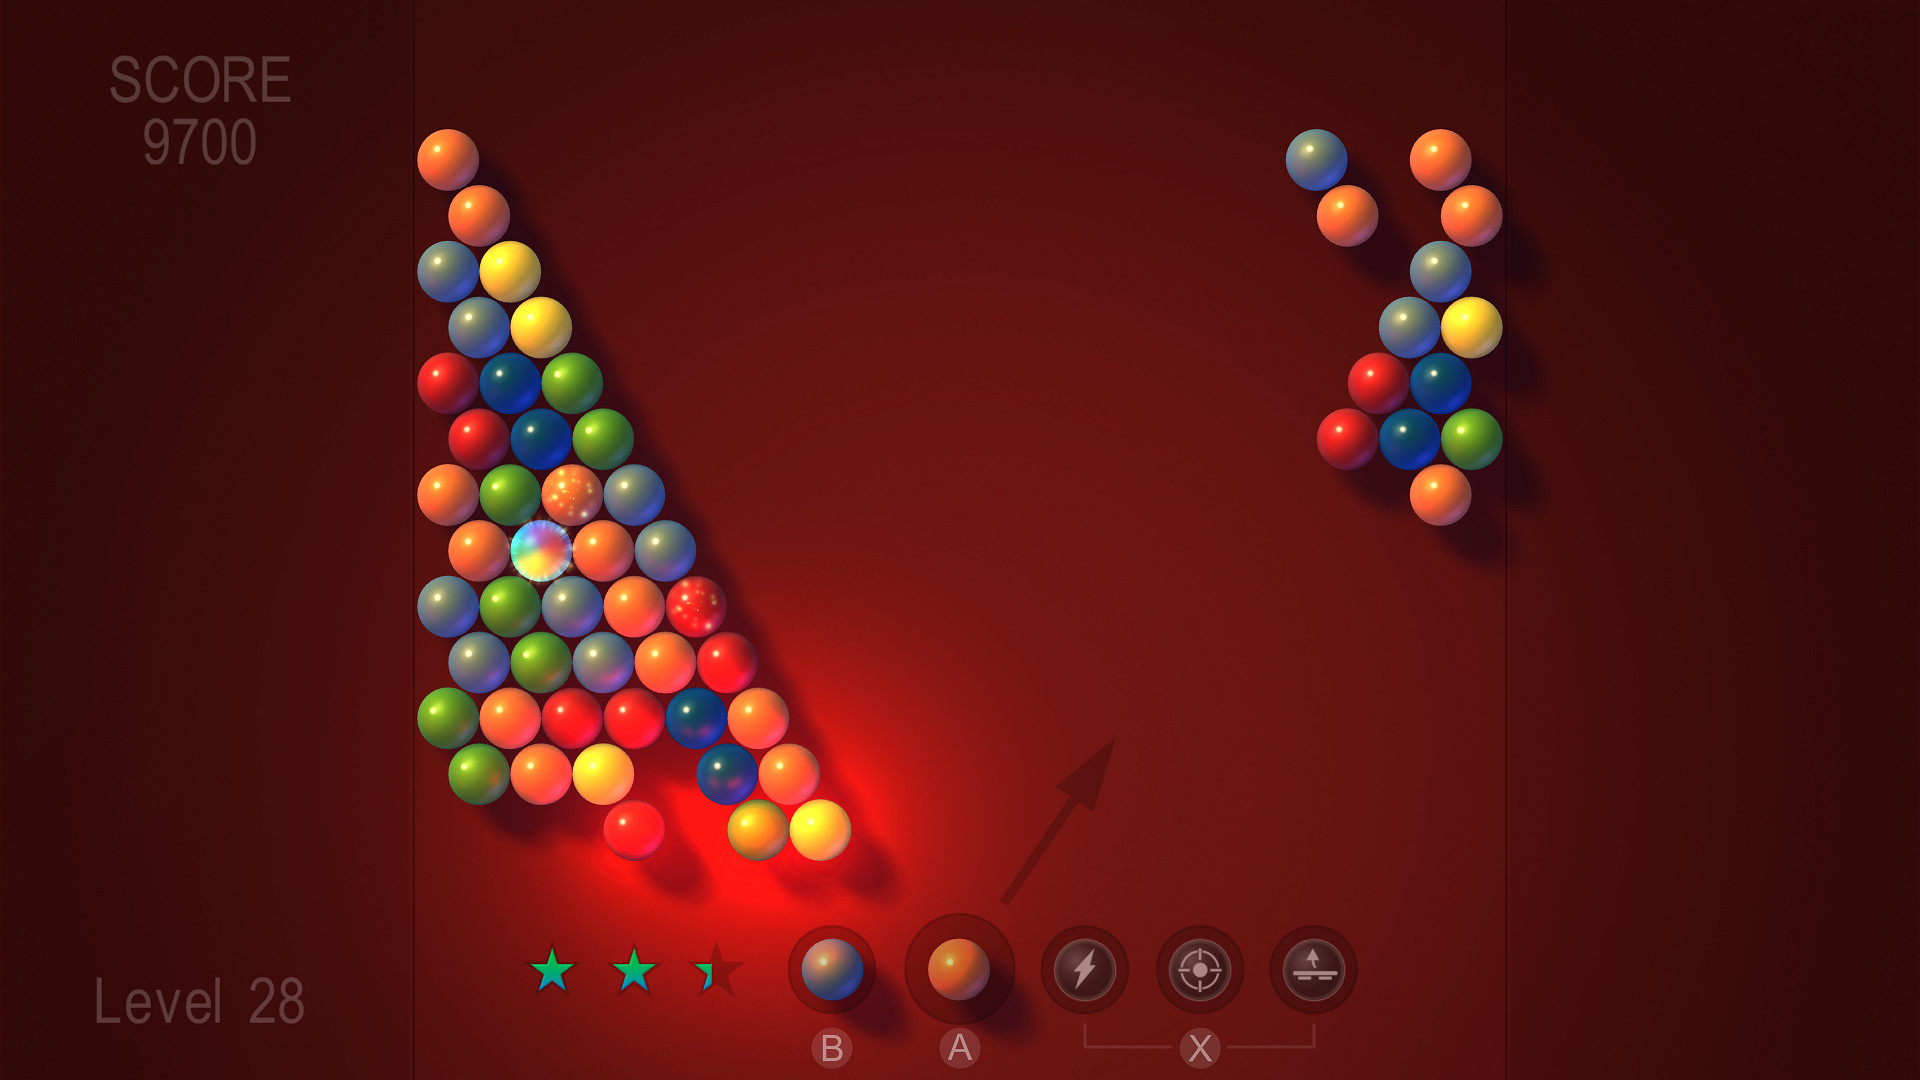 Bubble Shooter FX on Steam